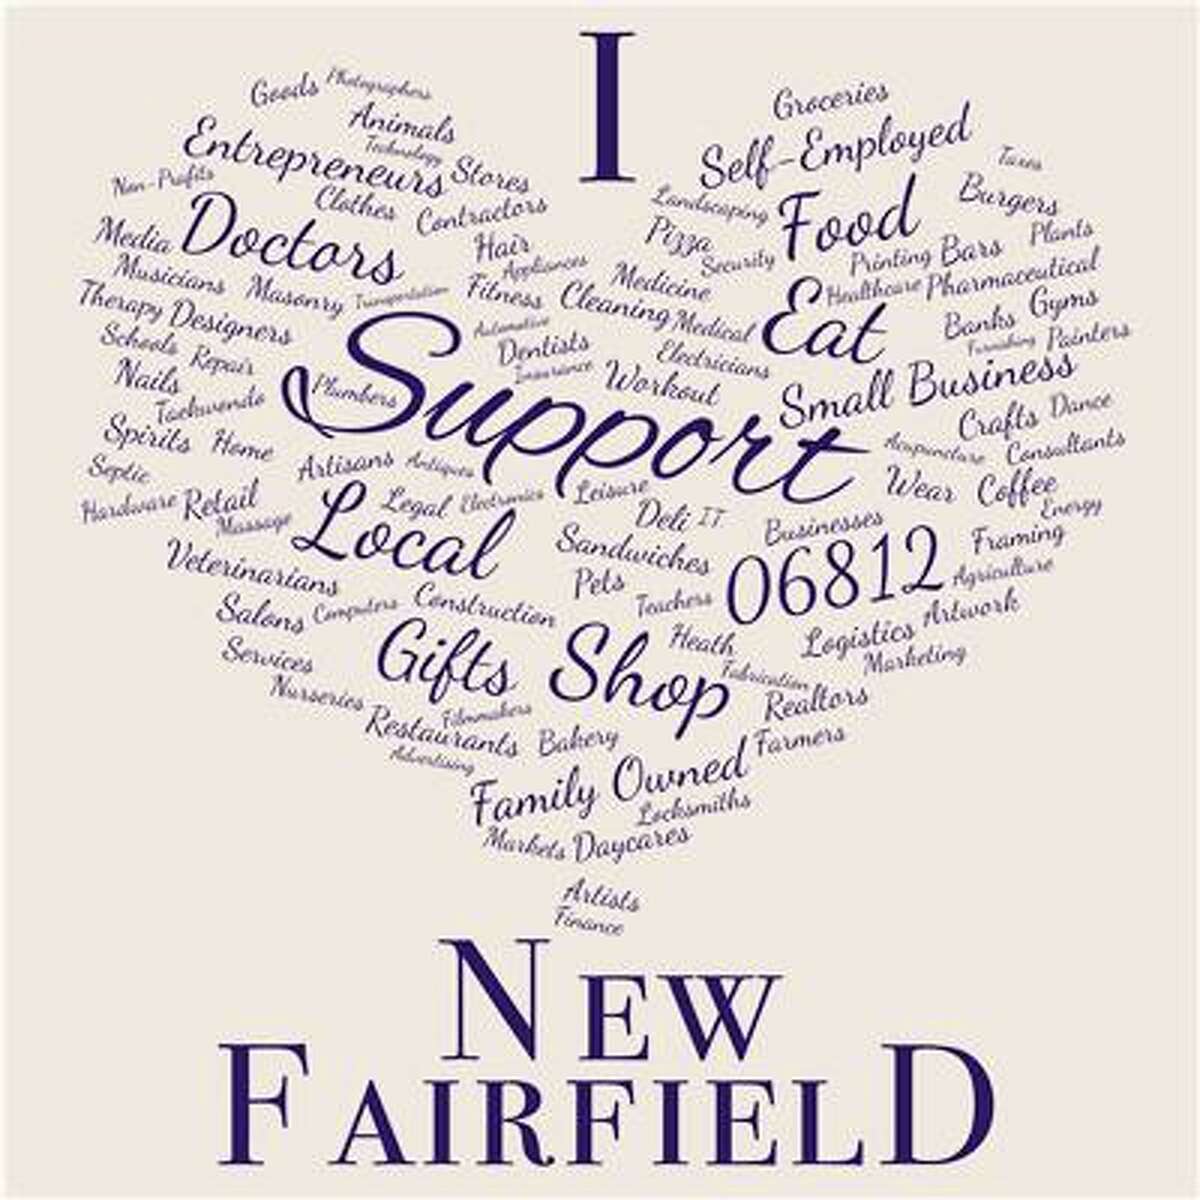 Design on T-shirts being sold as part of the New Fairfield Economic Development Commission’s ‘Support New Fairfield Businesses’ fundraiser to help local businesses during the COVID-19 pandemic.